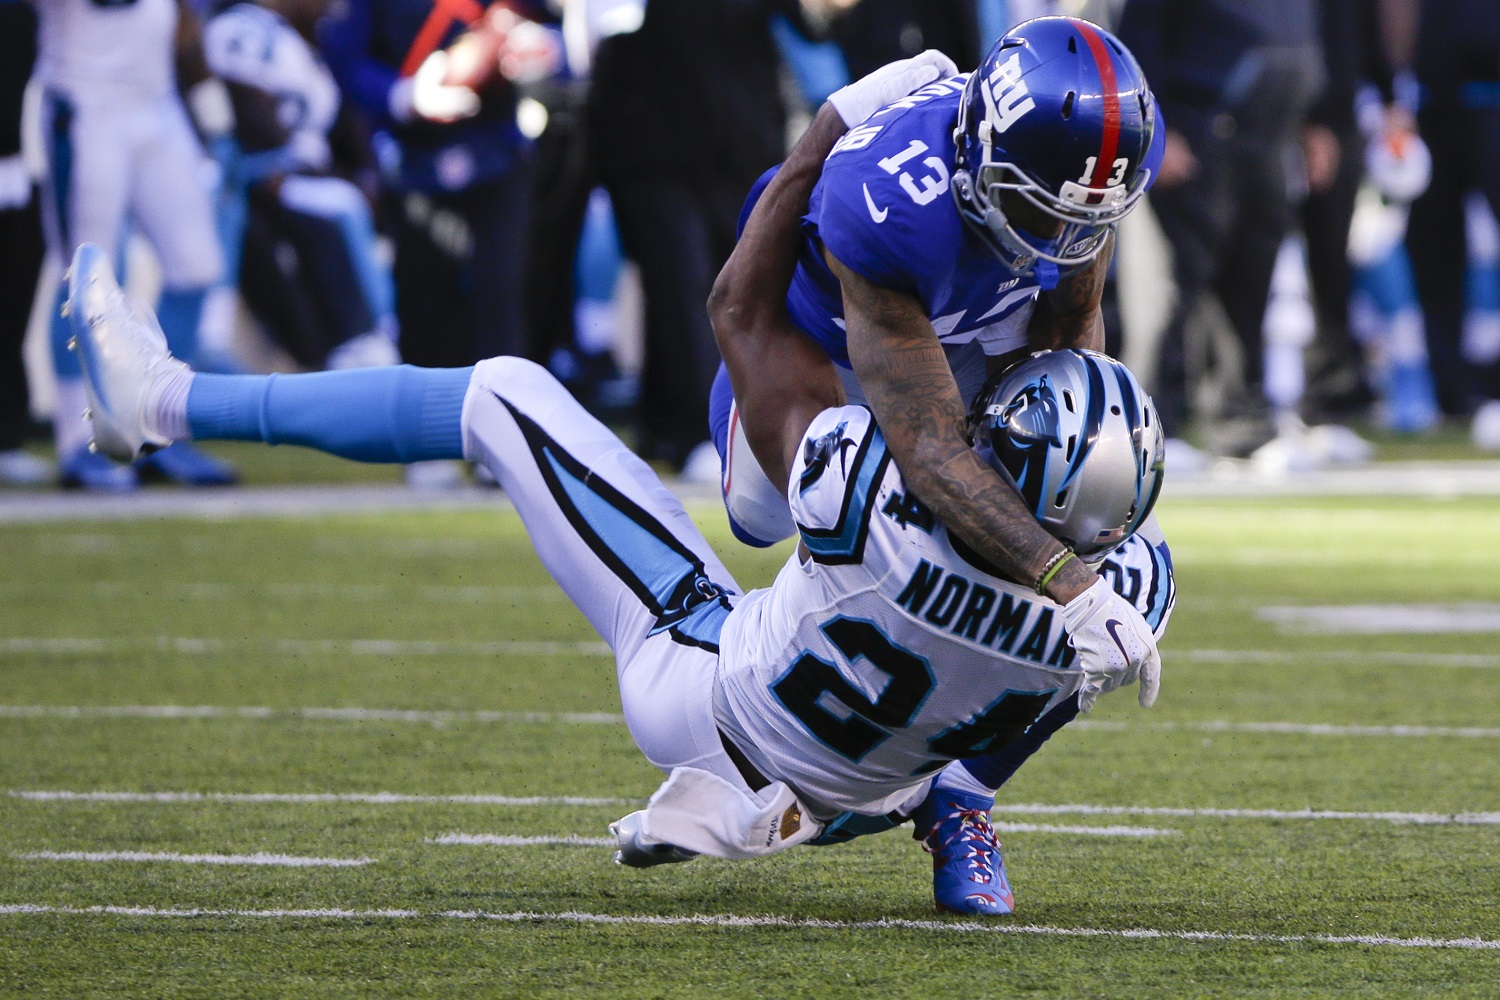 FILE - In this Sunday, Dec. 20, 2015, file photo, New York Giants wide receiver Odell Beckham Jr. (13) and Carolina Panthers' Josh Norman (24) battle during the first half of an NFL football game in East Rutherford, N.J. Beckham  isn't changing the way he plays, just the actions that led to his recent one-game suspension for multiple violations of safety-related playing rules. (AP Photo/Julie Jacobson, File)